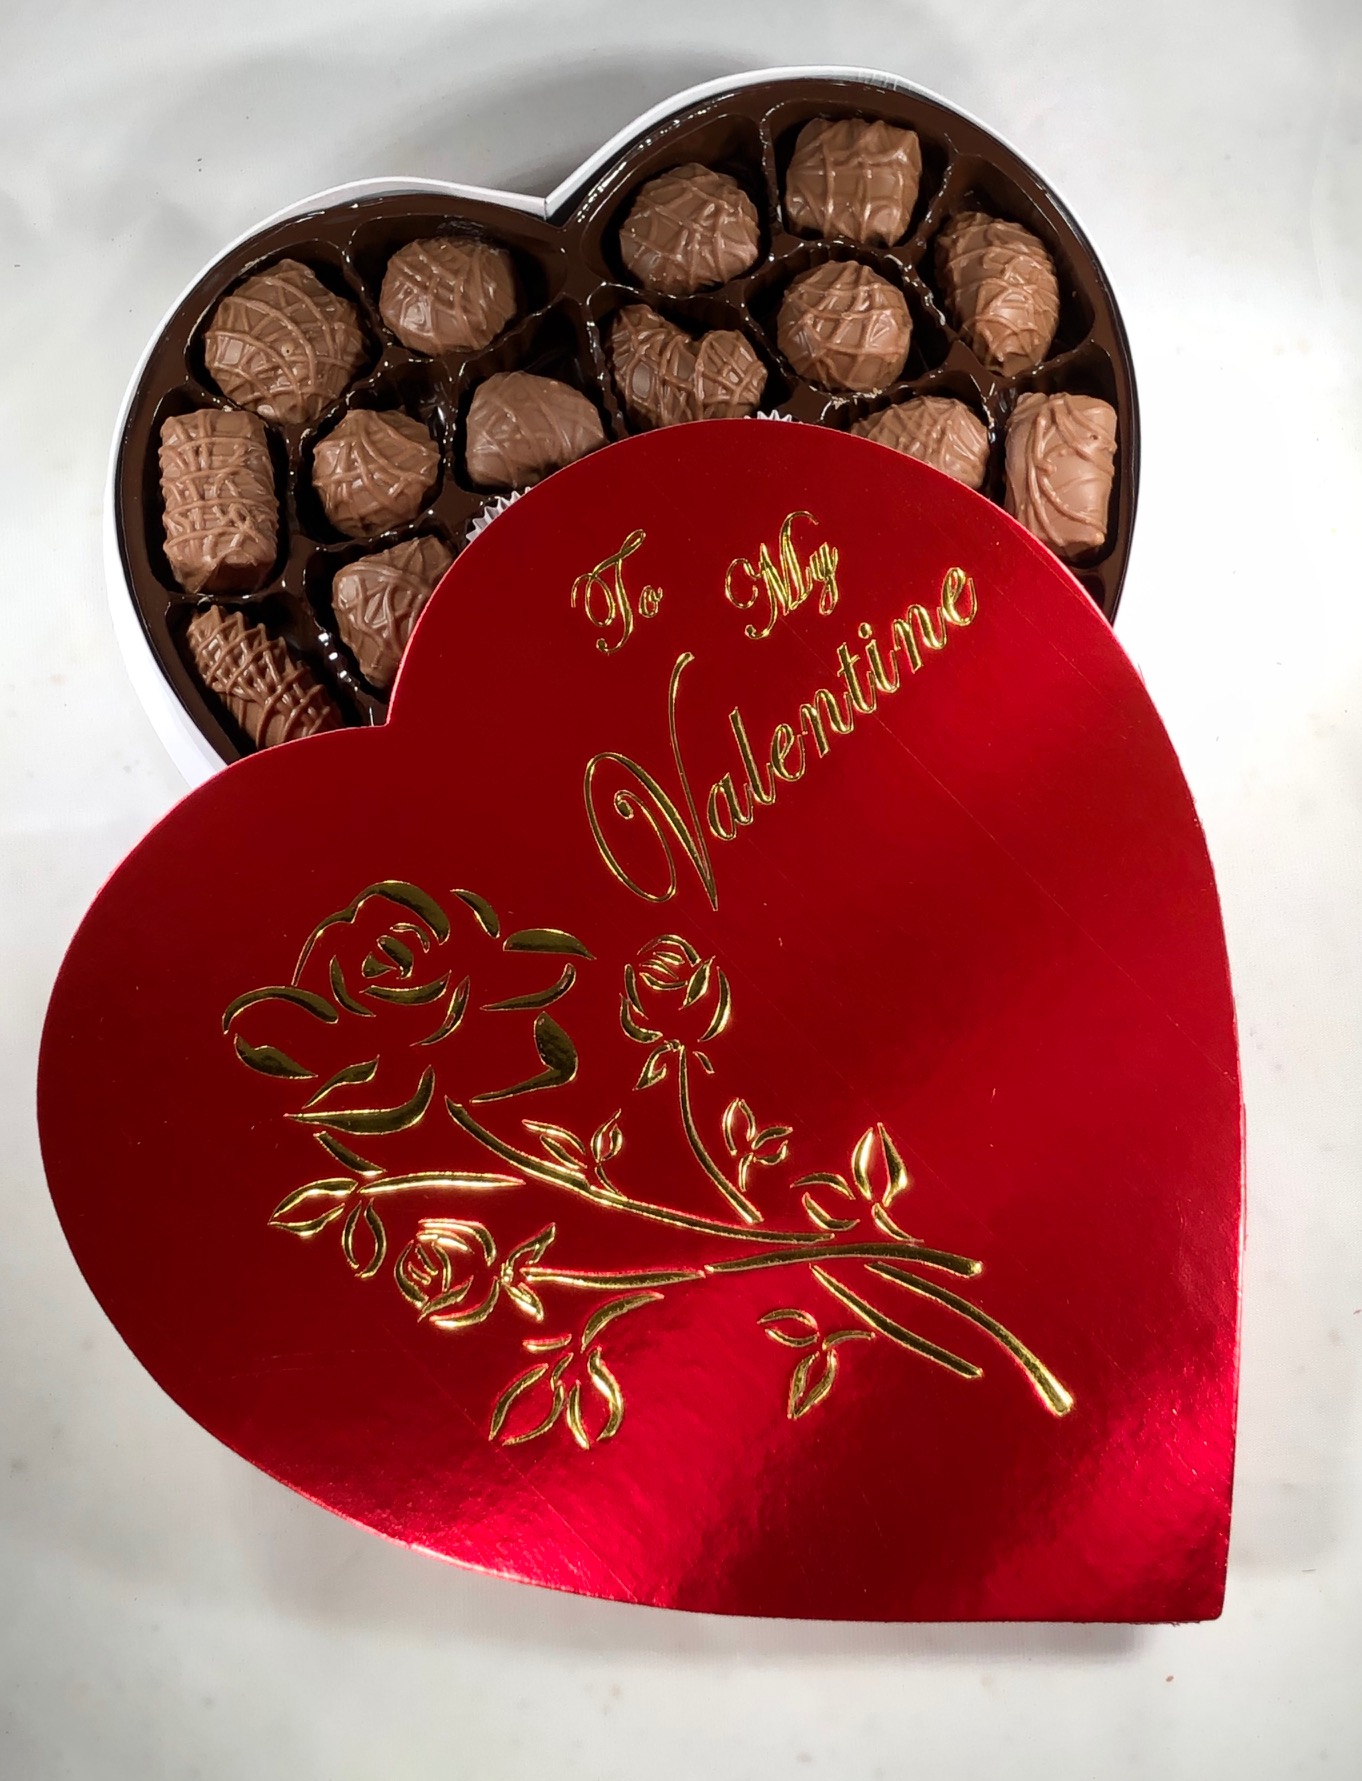 Heart-shaped Box of Chocolates - Anderson's Candies